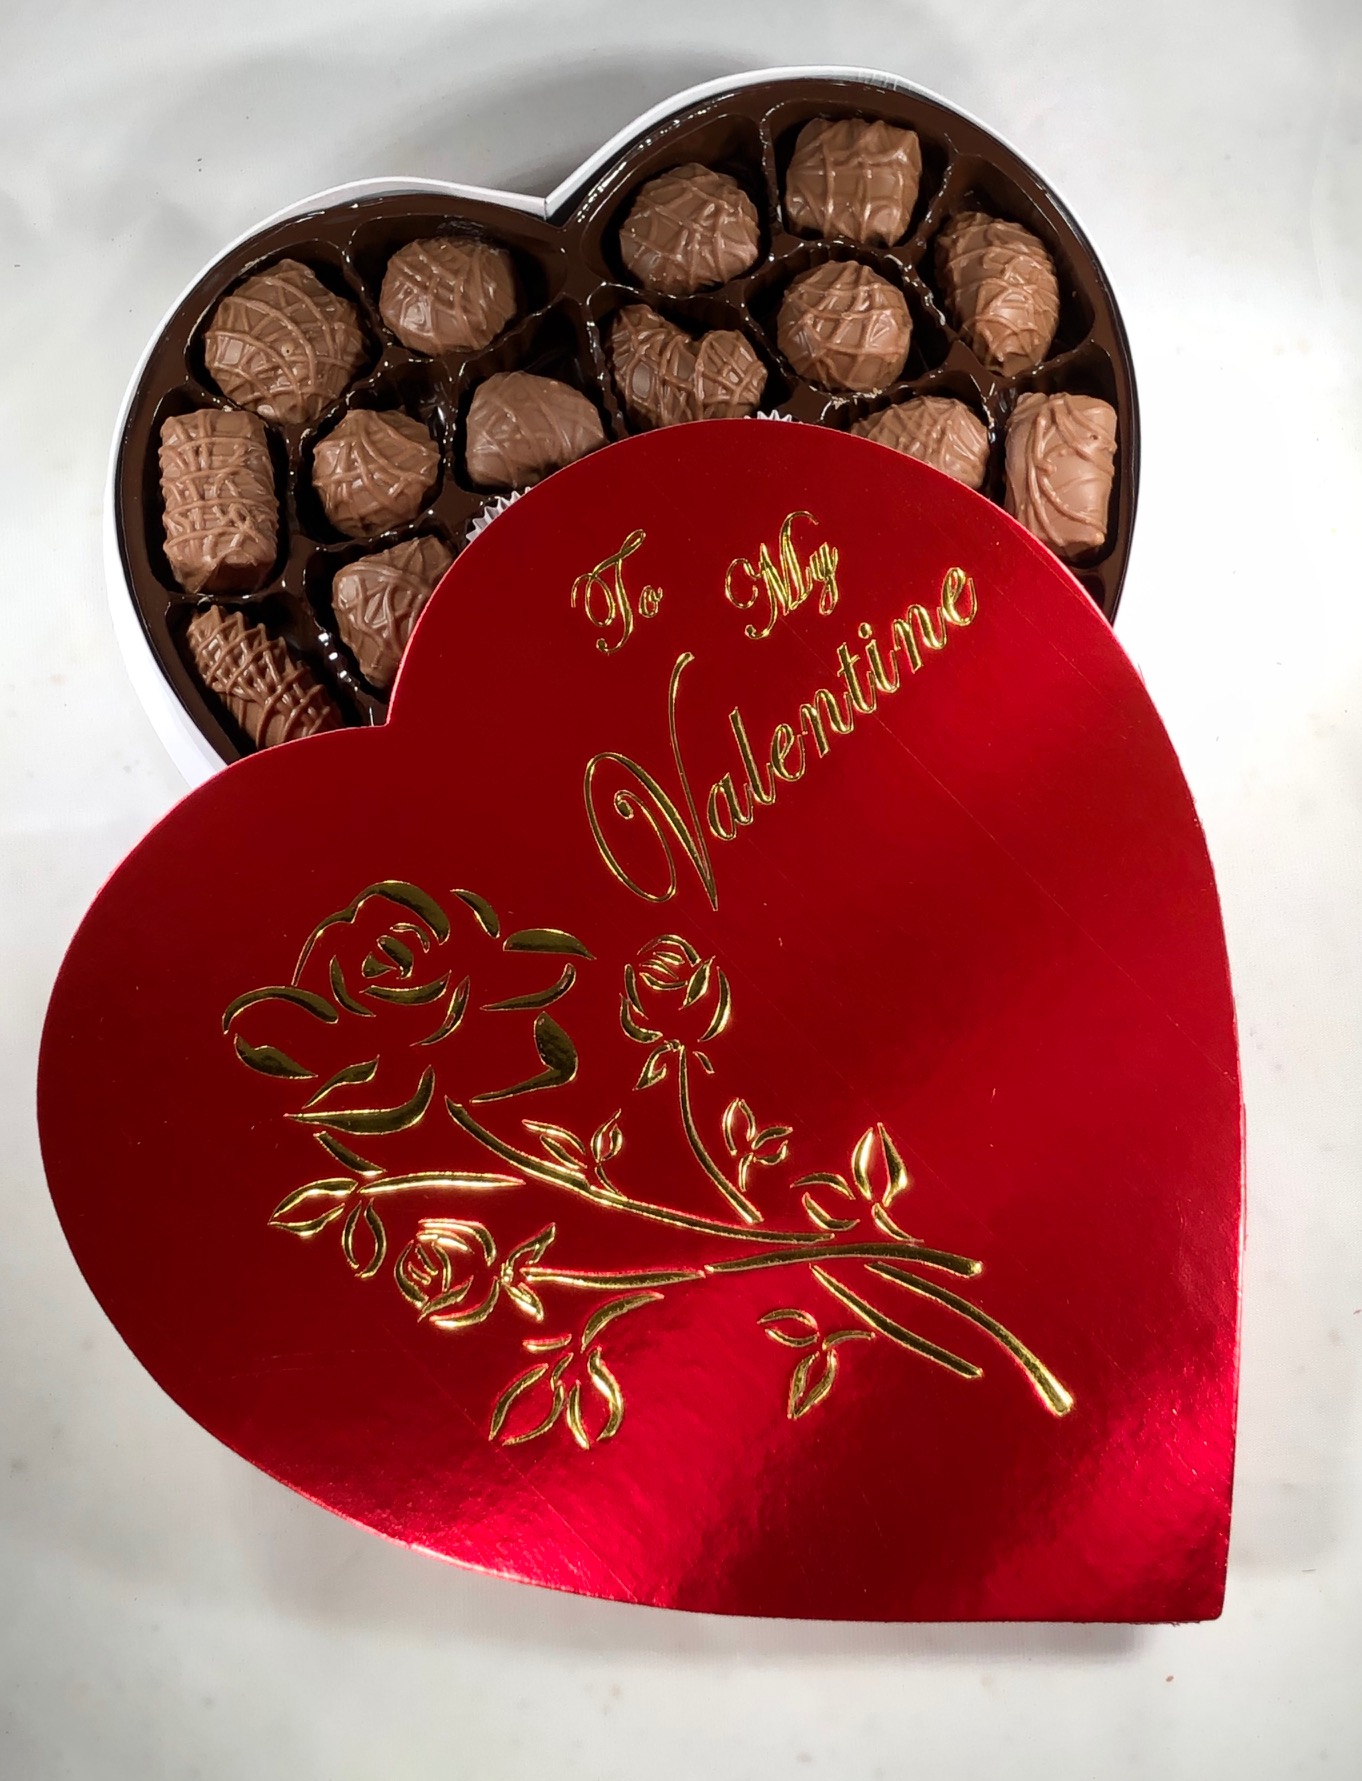 Heart-shaped Box of Chocolates - Anderson's Candies